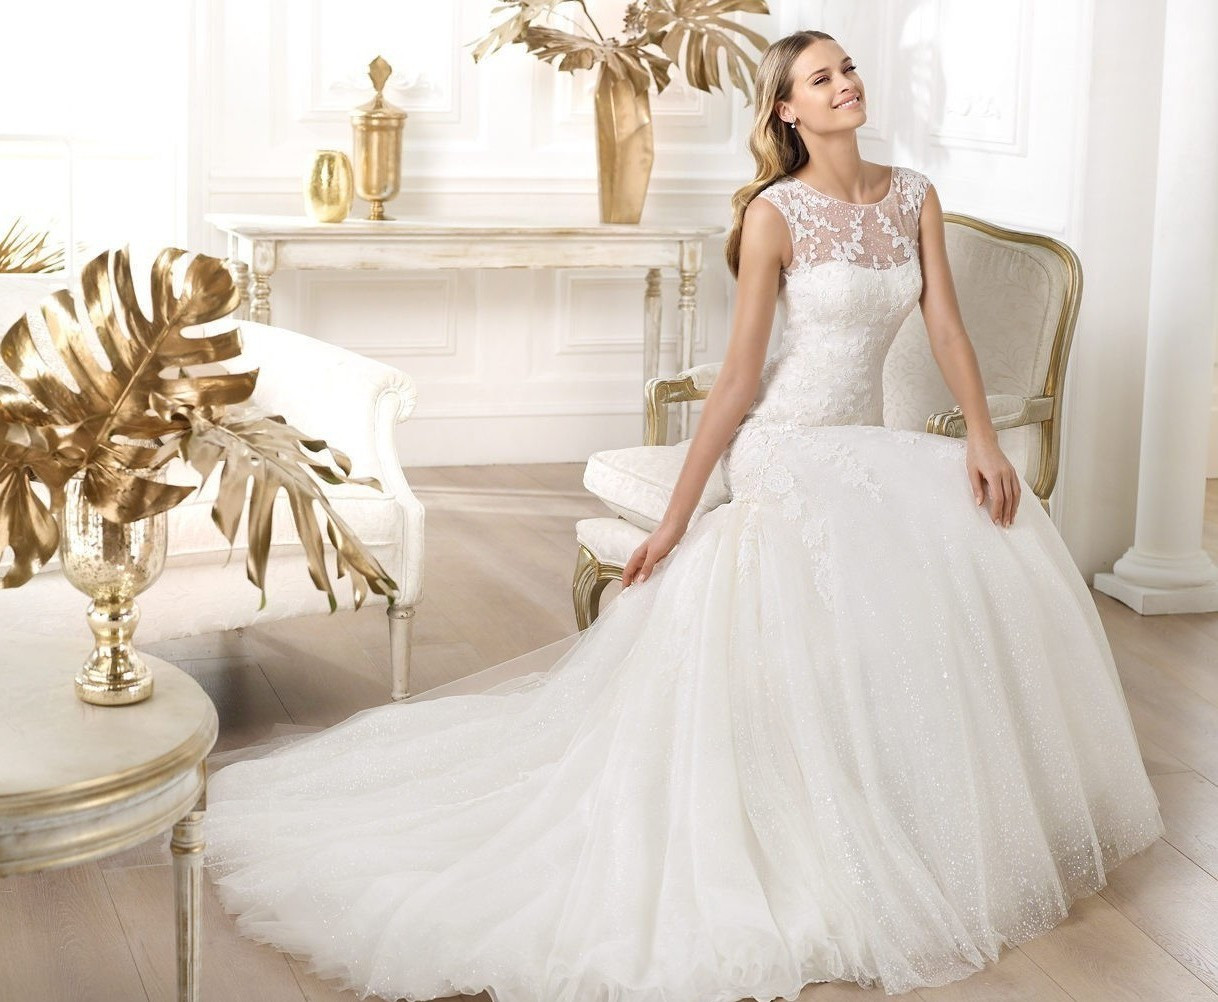 Renting Wedding Dresses
 Rent Your Dream Wedding Dress With Perfect Fit And